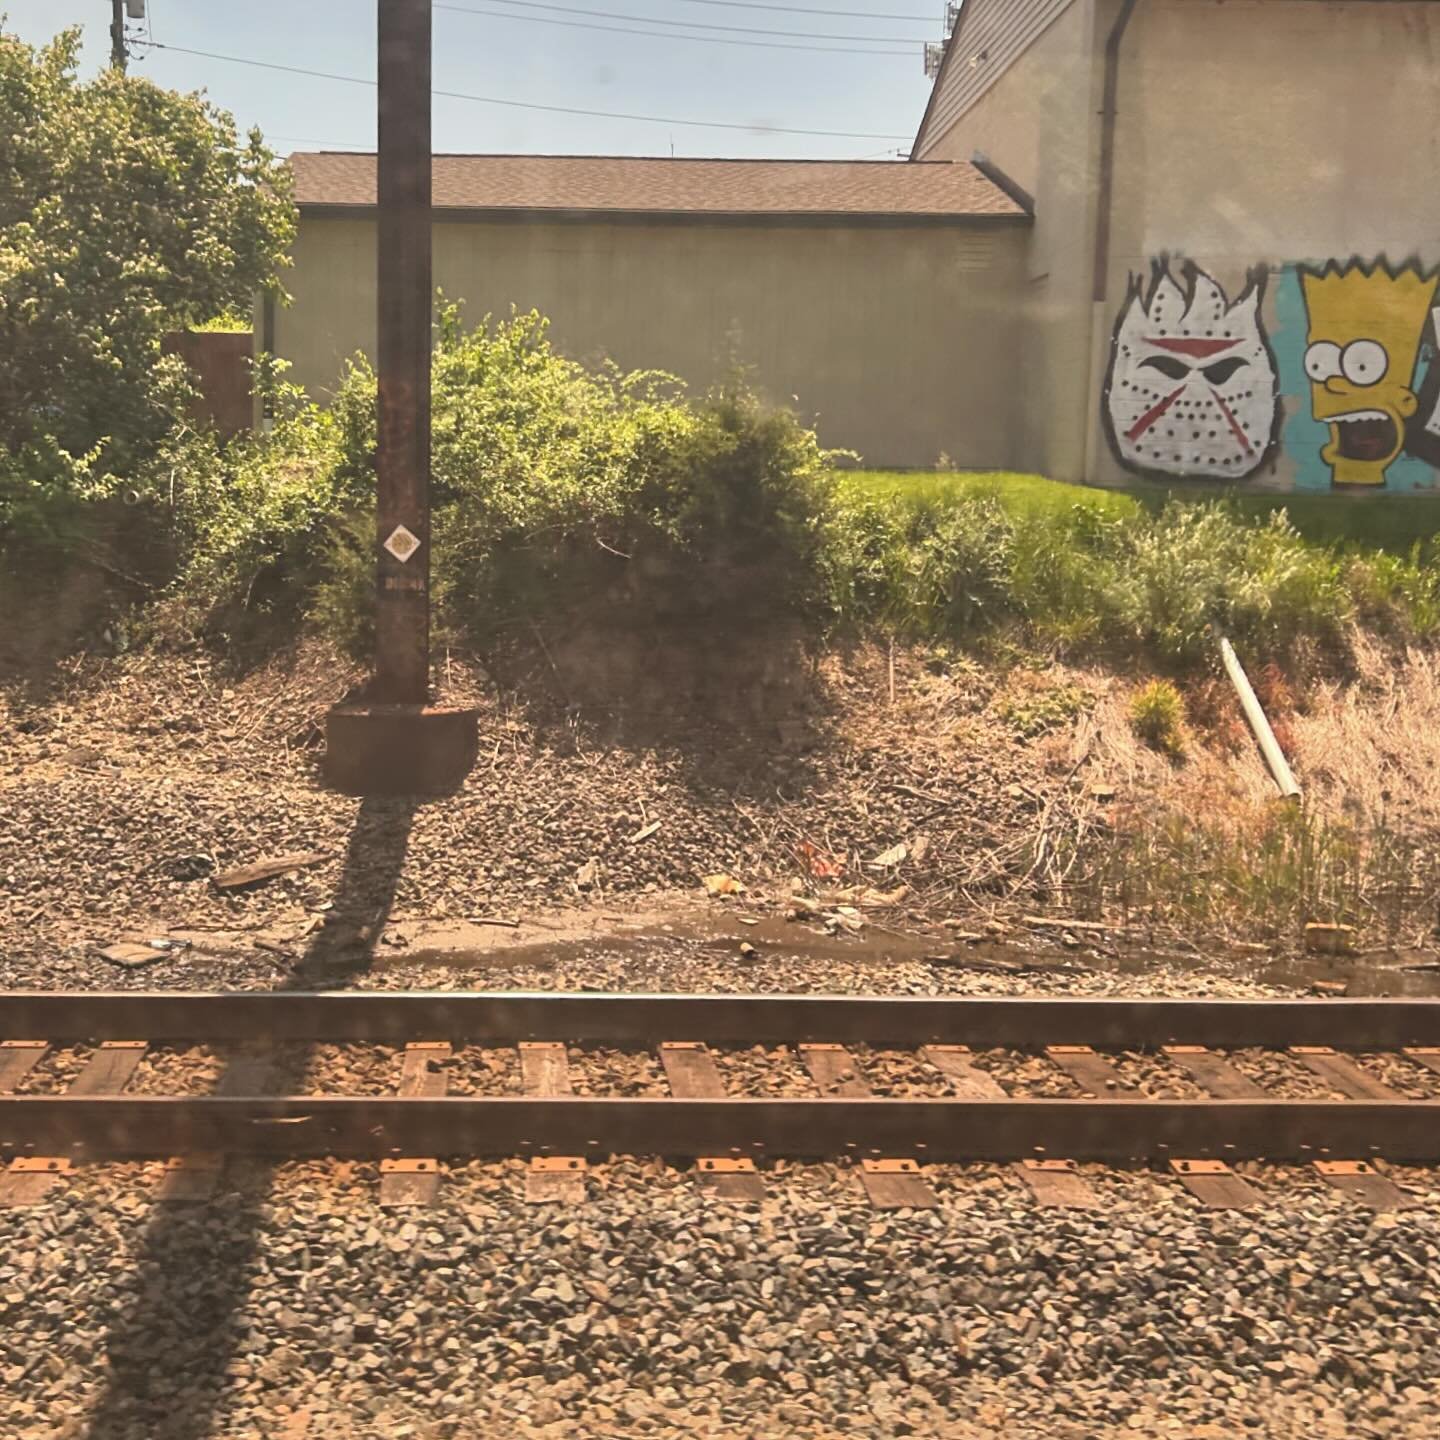 View from a train. NYC bound. Always makes me think of @staceyevansphotos and her evocative train travel images. 🧡 #wanderings #family